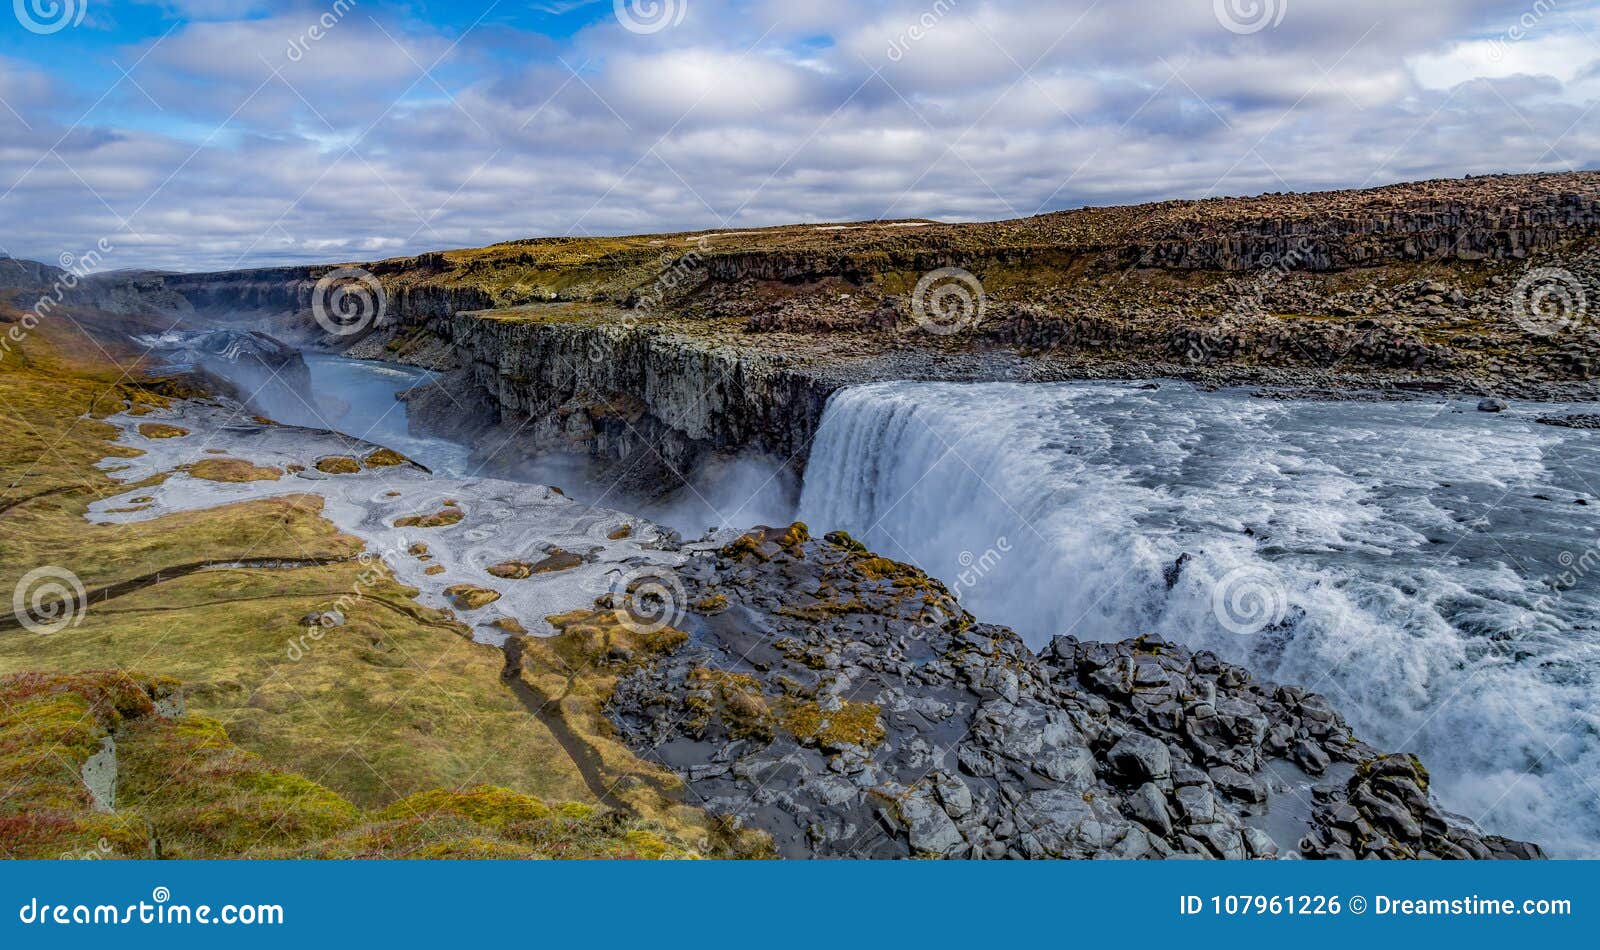 Iceland, land of fire and ice › WorldWideWendy